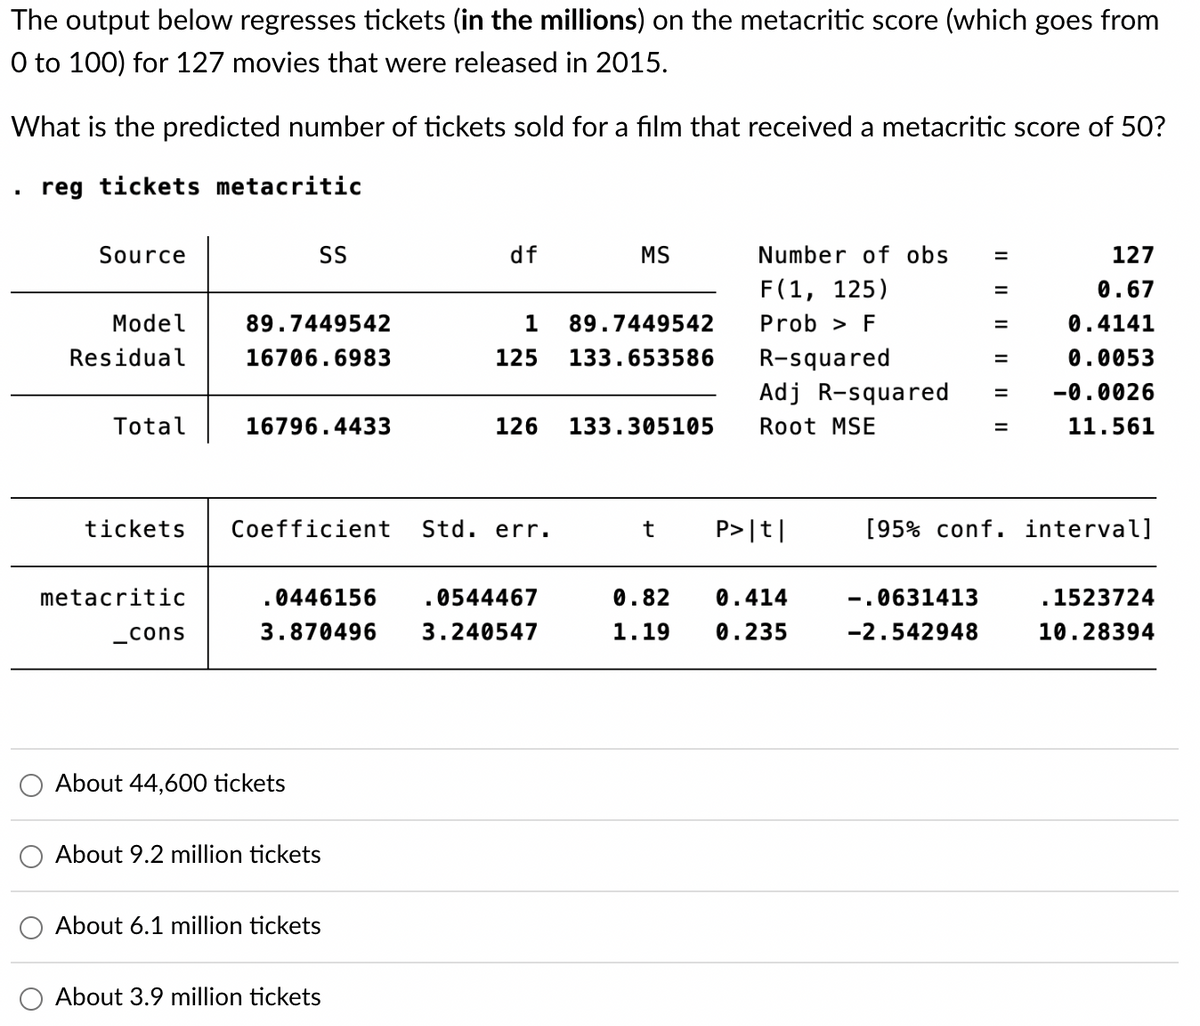 The output below regresses tickets (in the millions) on the metacritic score (which goes from
0 to 100) for 127 movies that were released in 2015.
What is the predicted number of tickets sold for a film that received a metacritic score of 50?
reg tickets metacritic
Source
SS
df
MS
Model
Residual
89.7449542
16706.6983
1 89.7449542
125 133.653586
Total
16796.4433
126 133.305105
Number of obs
F(1, 125)
Prob > F
R-squared
Adj R-squared
Root MSE
=
=
|| || || || || ||
=
=
127
0.67
0.4141
0.0053
-0.0026
11.561
tickets
Coefficient Std. err.
t
P>|t|
[95% conf. interval]
metacritic
_ cons
0446156 .0544467
3.870496 3.240547
0.82 0.414
1.19 0.235
-.0631413
-2.542948
.1523724
10.28394
About 44,600 tickets
About 9.2 million tickets
About 6.1 million tickets
About 3.9 million tickets